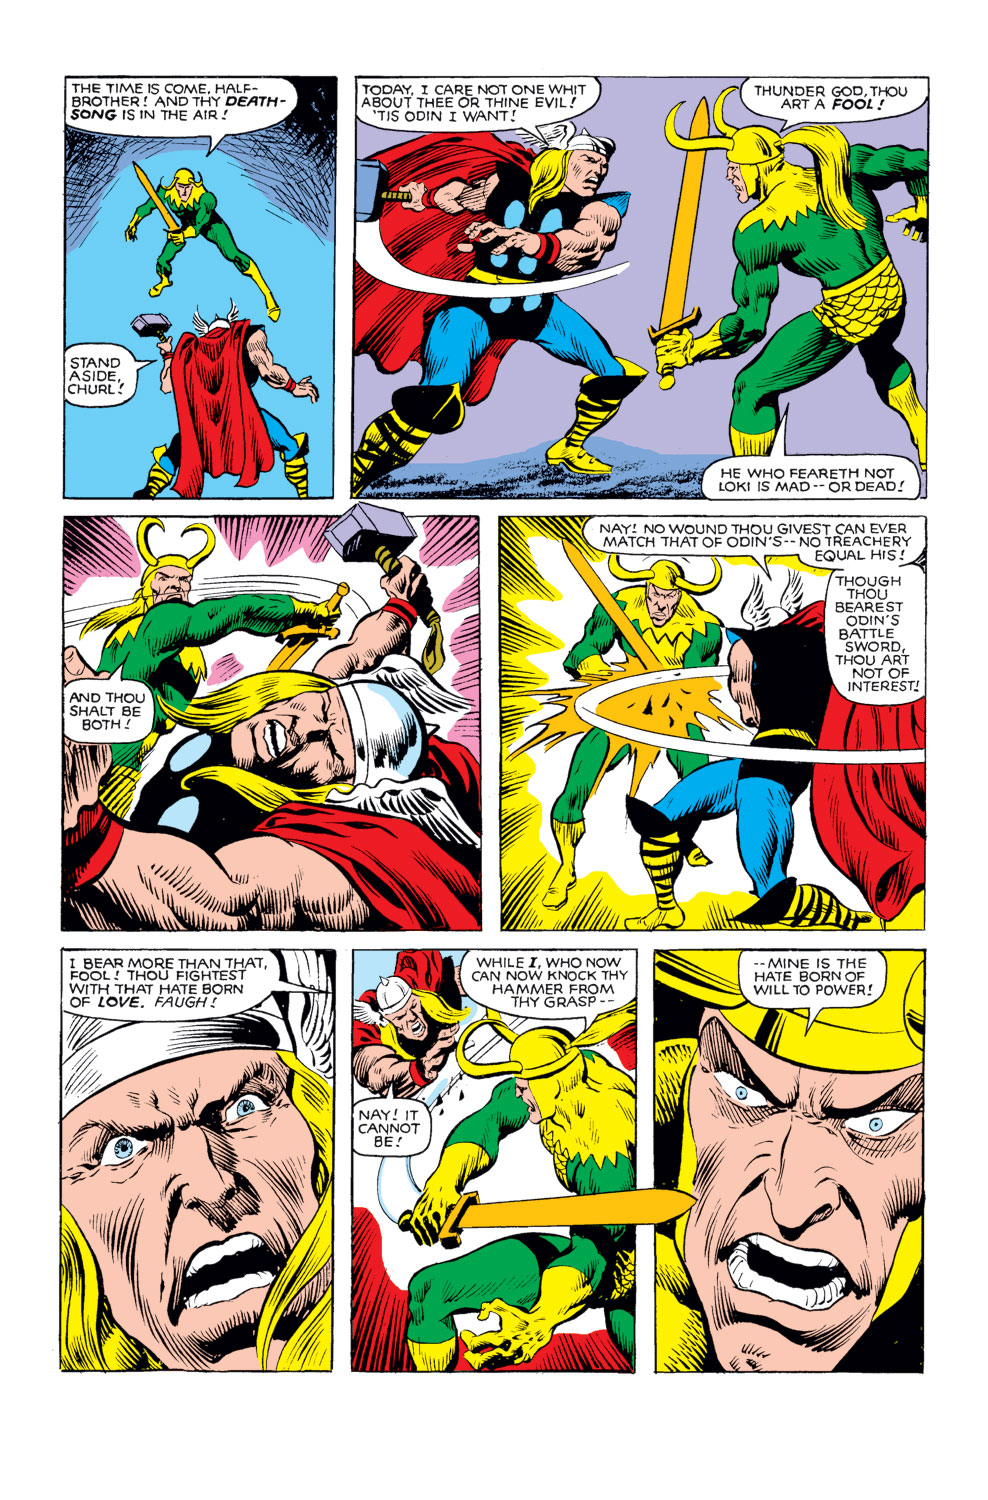 What If? (1977) Issue #25 - Thor and the Avengers battled the gods #25 - English 25